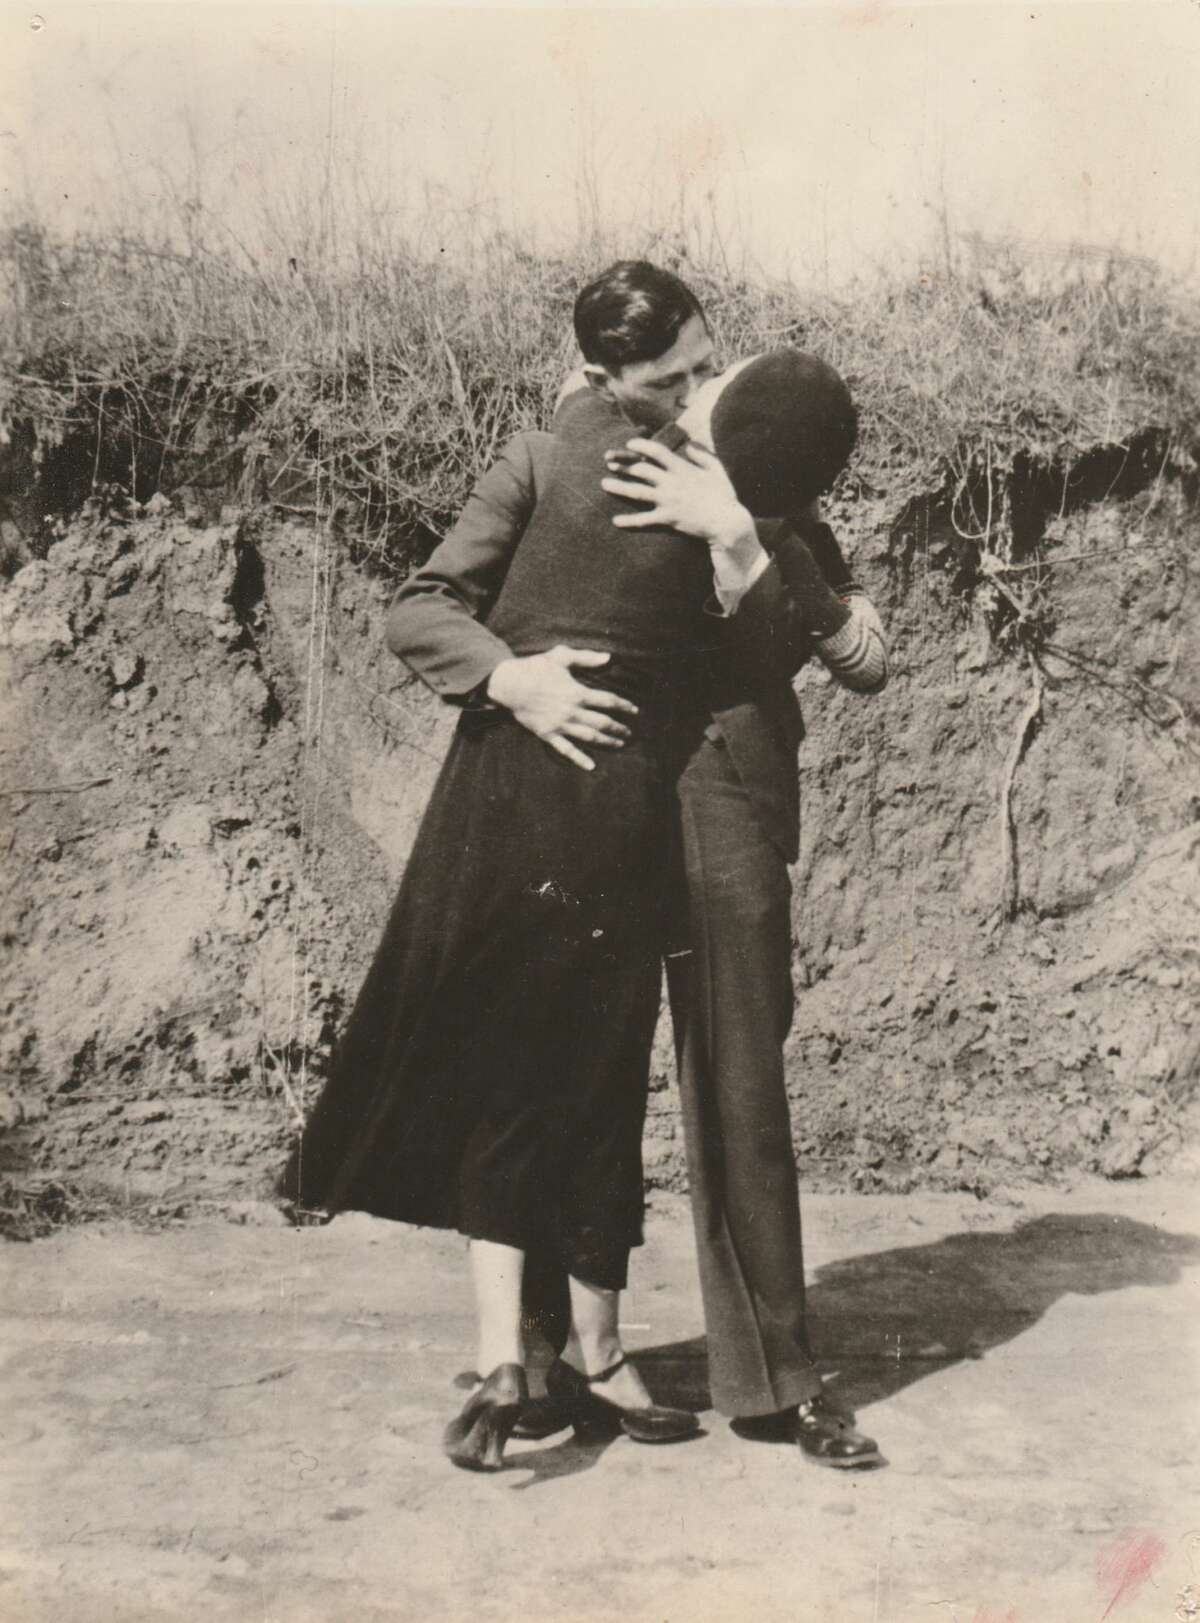 Rarely seen Bonnie and Clyde photos featured in Dallas gallery, now owned